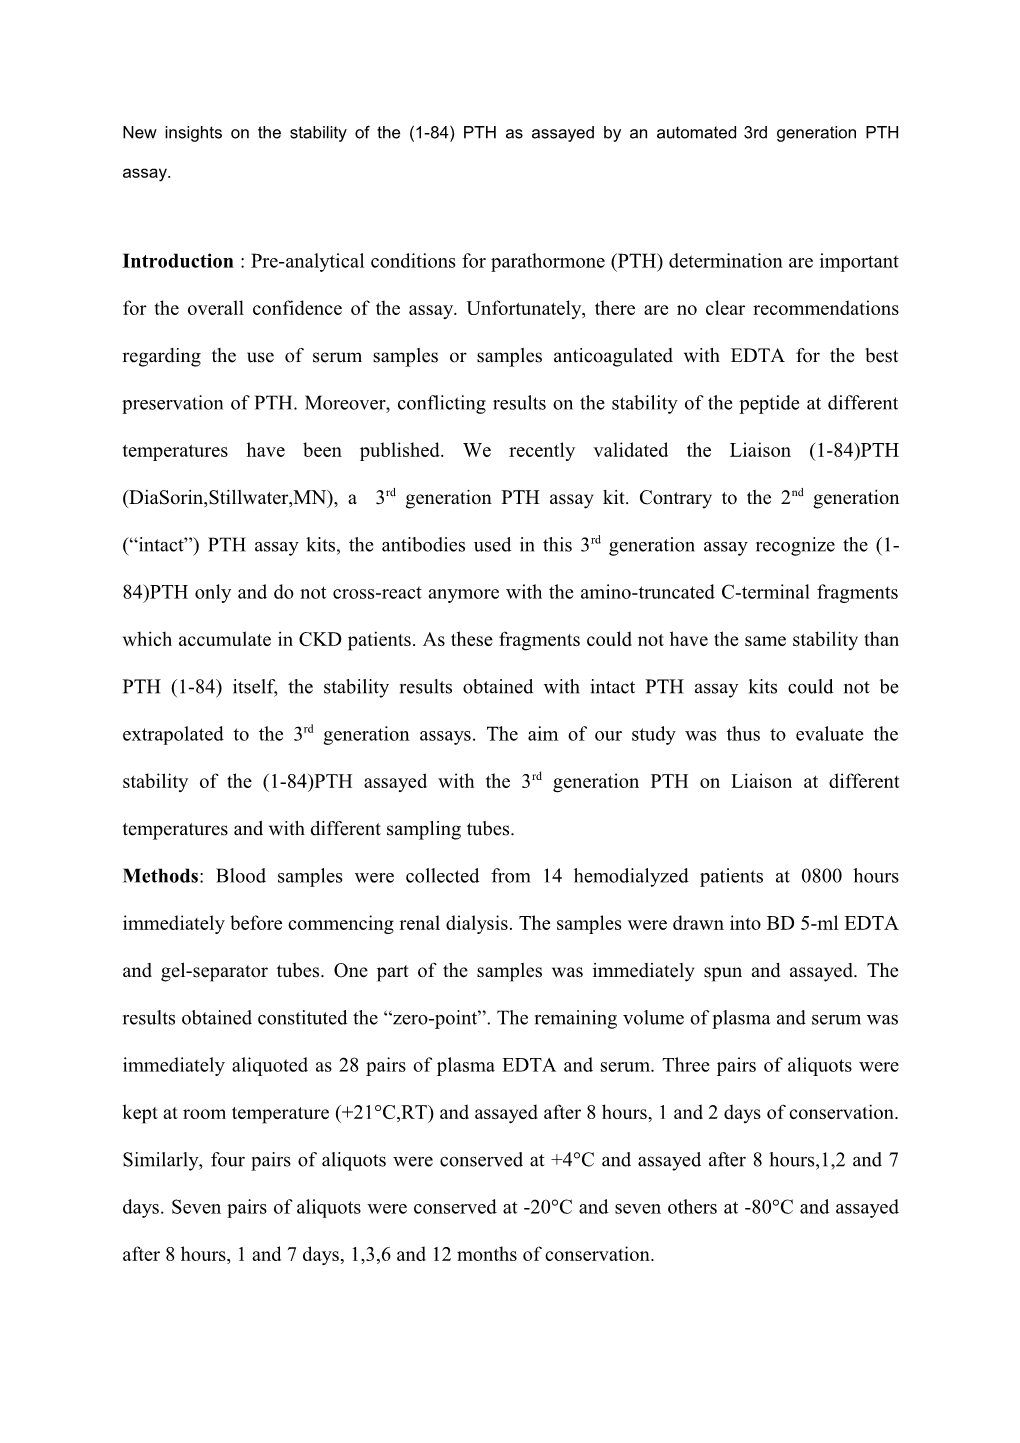 New Insights on the Stability of the (1-84) PTH As Assayed by an Automated3rd Generation